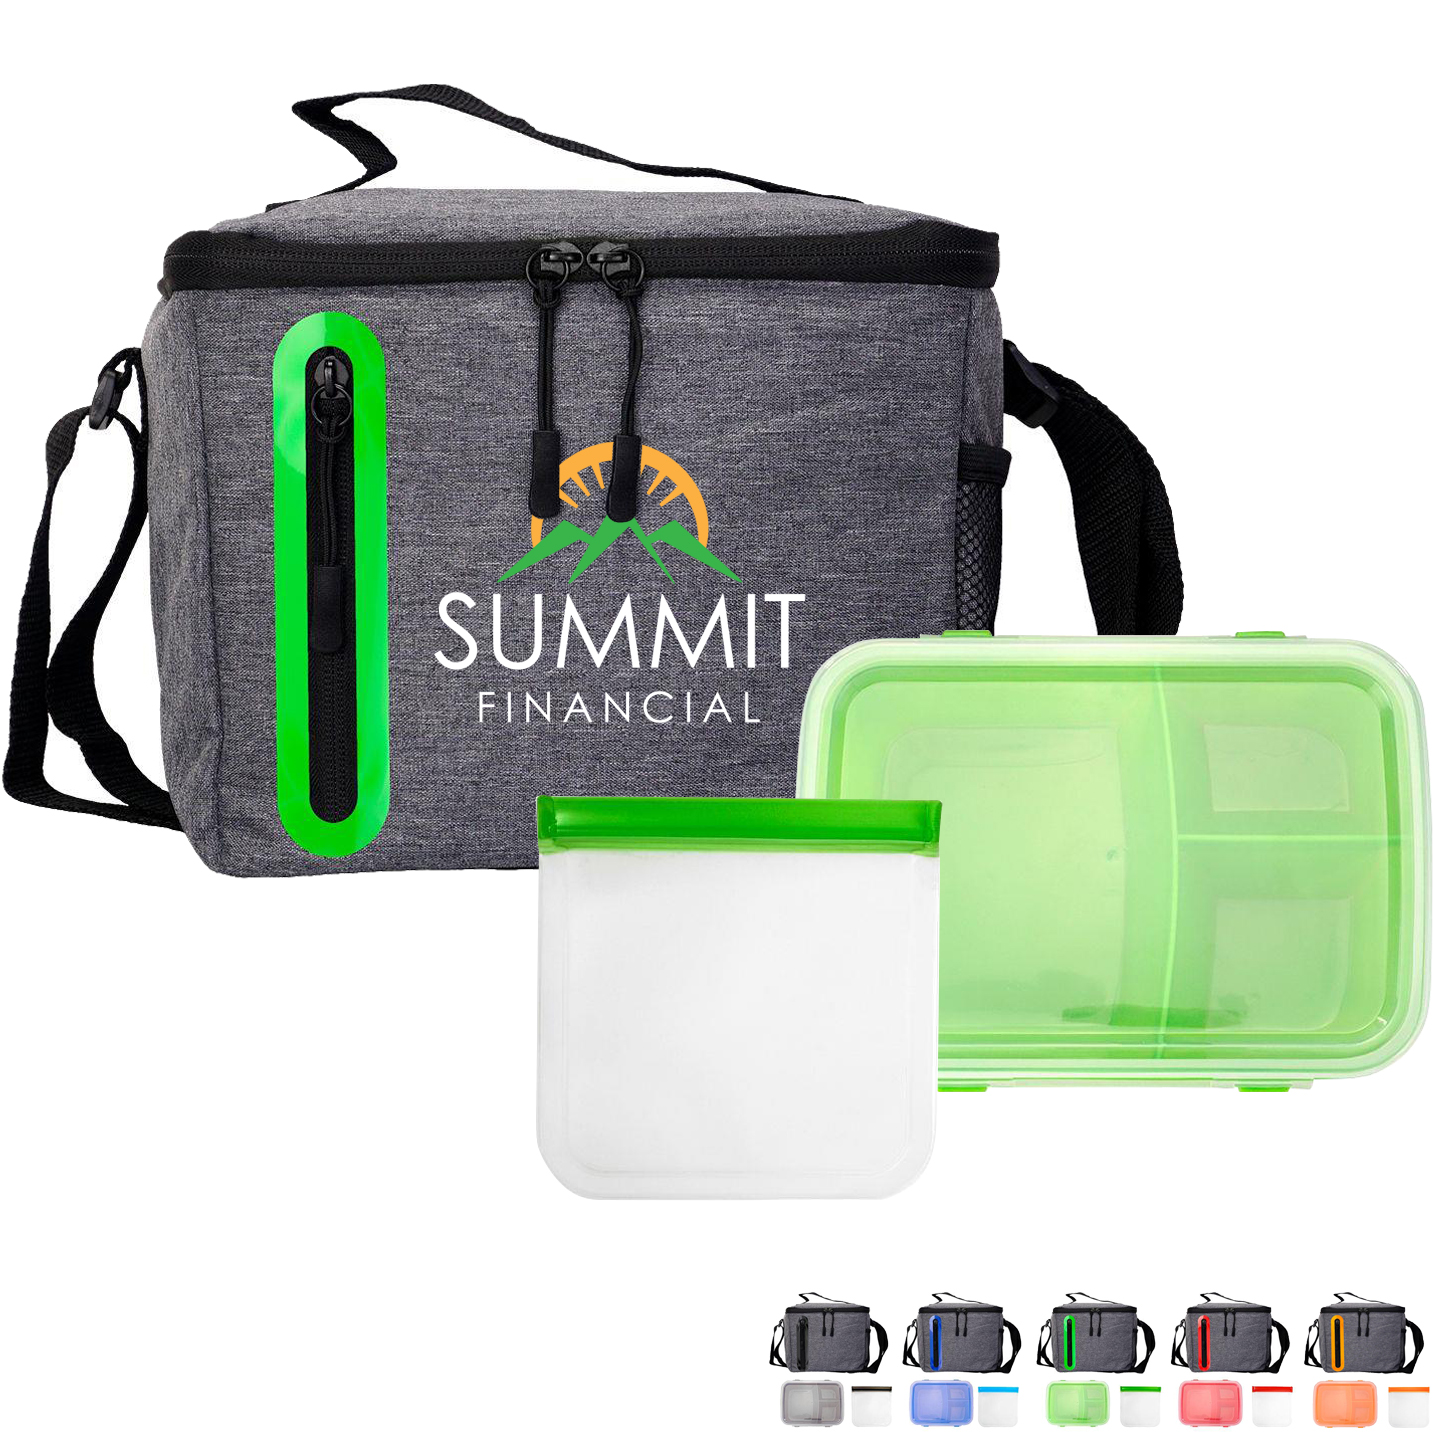 Bag & Cooler Gift Sets by Business Gifts, Promotional Products, Customized Appreciation Gifts